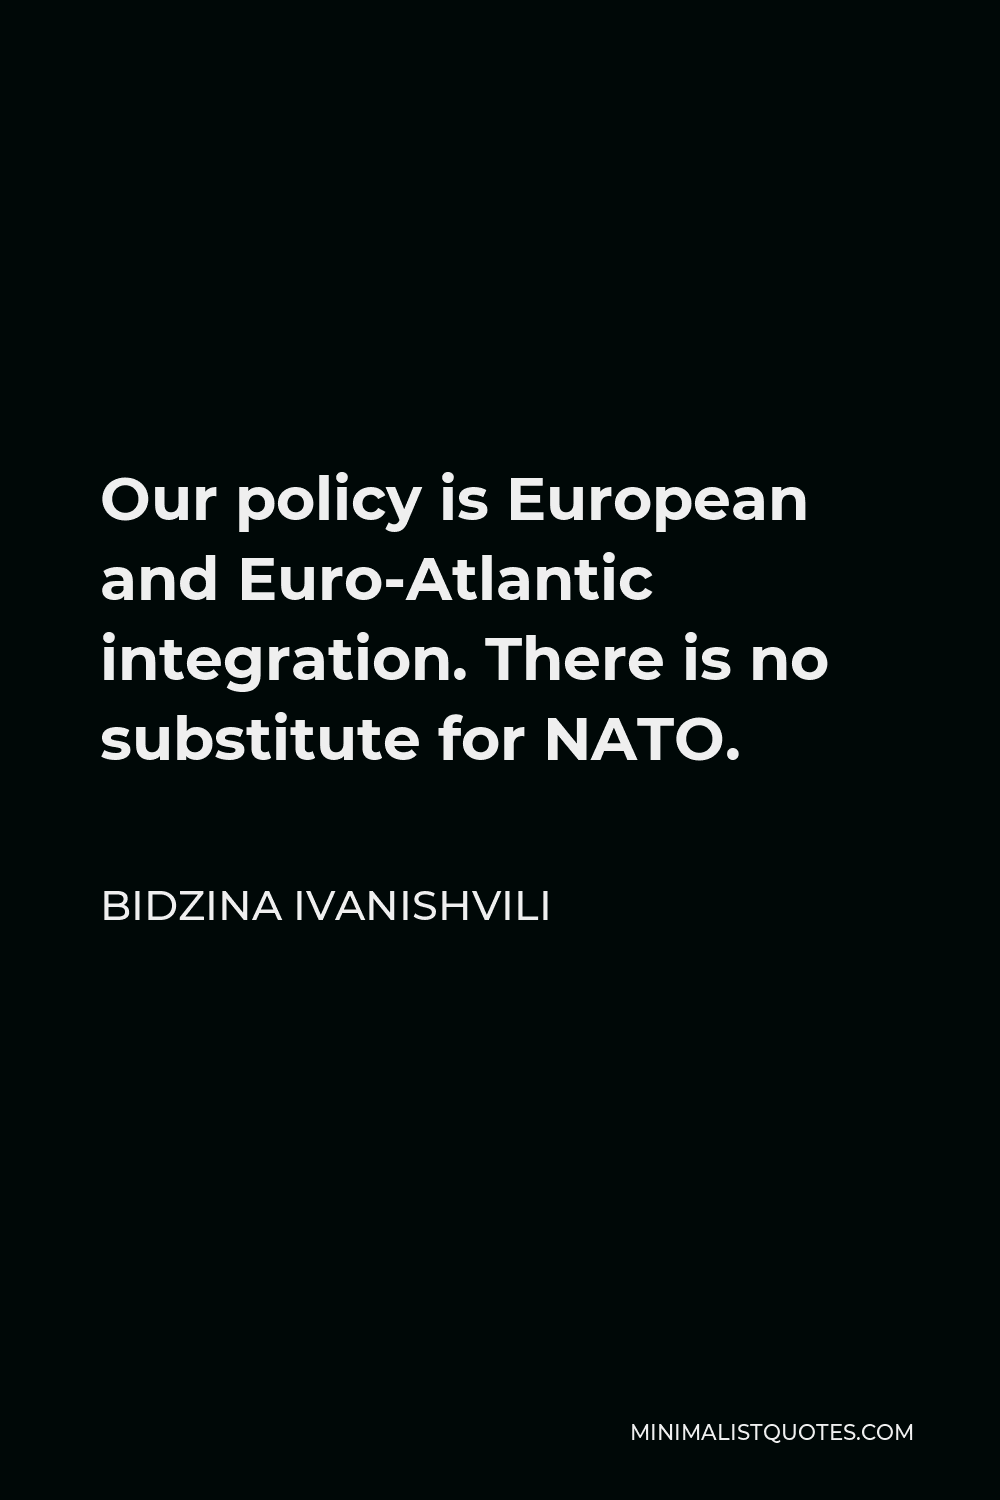 Bidzina Ivanishvili Quote - Our policy is European and Euro-Atlantic integration. There is no substitute for NATO.